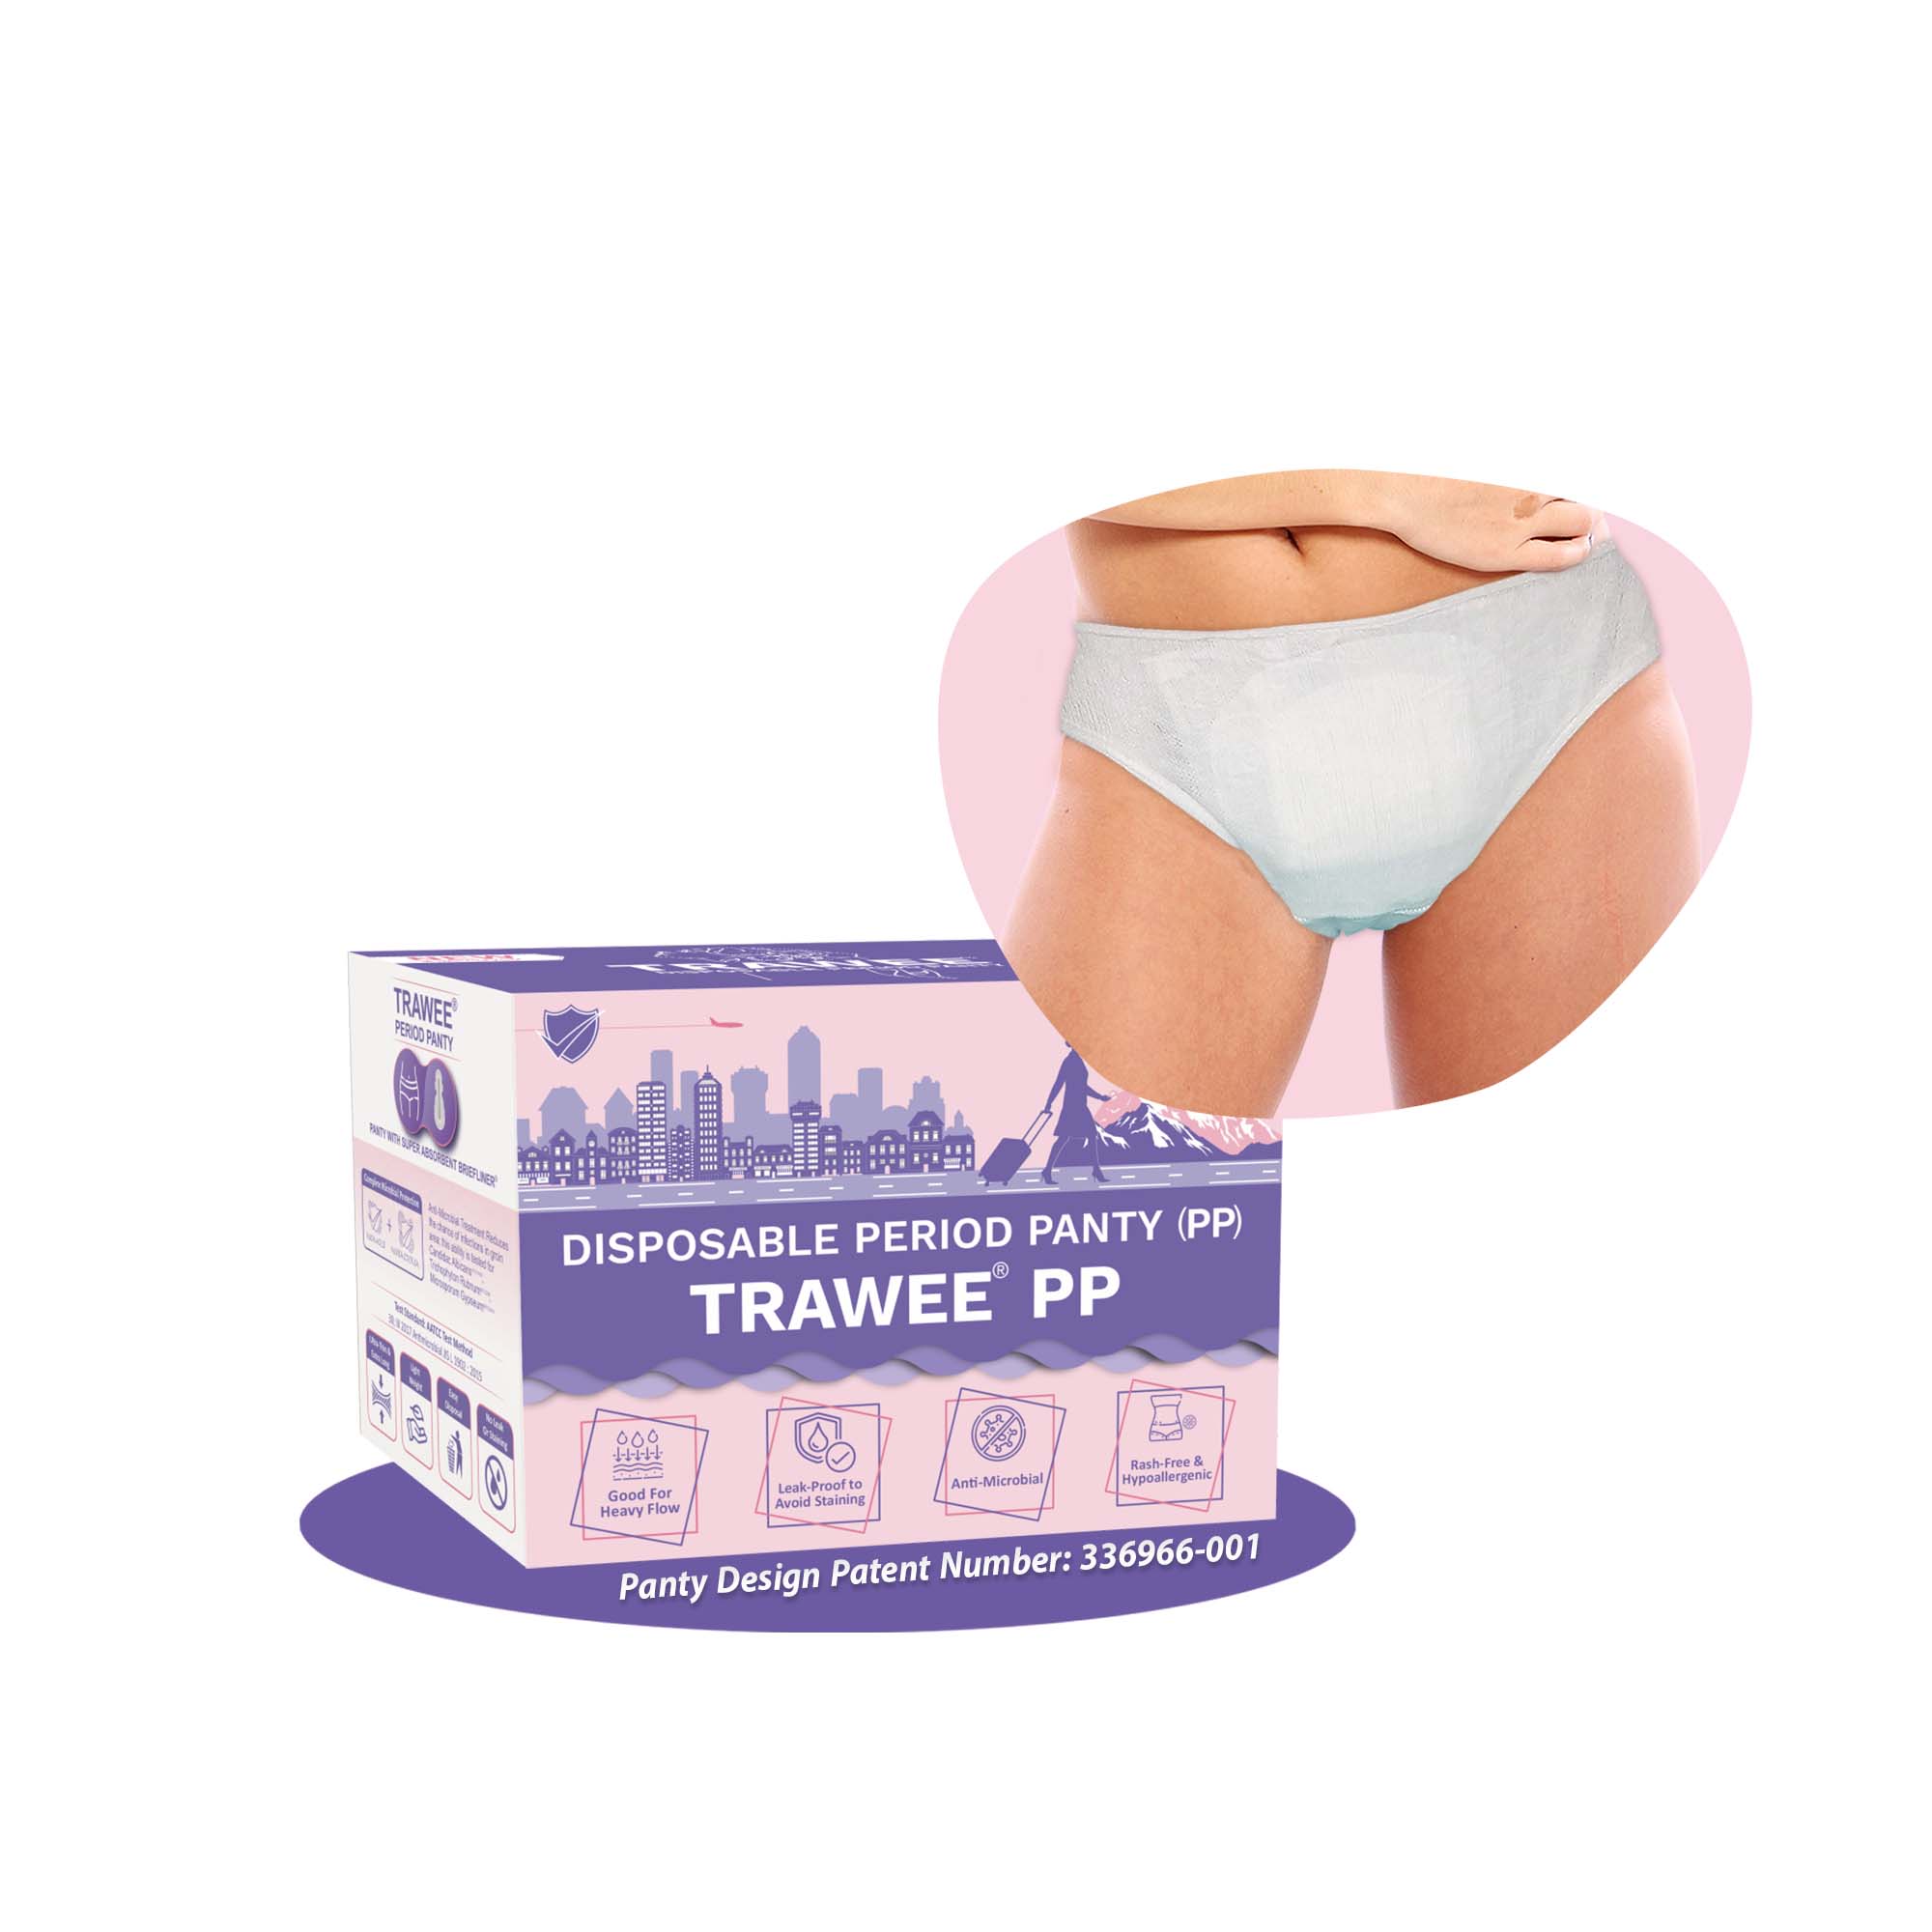 Trawee®-PP Disposable Period Panty with Super Absorbent Pad for Sanitary Protection, Menstrual Briefs, Absorbent Period Underwear for Women (Pack of 5)